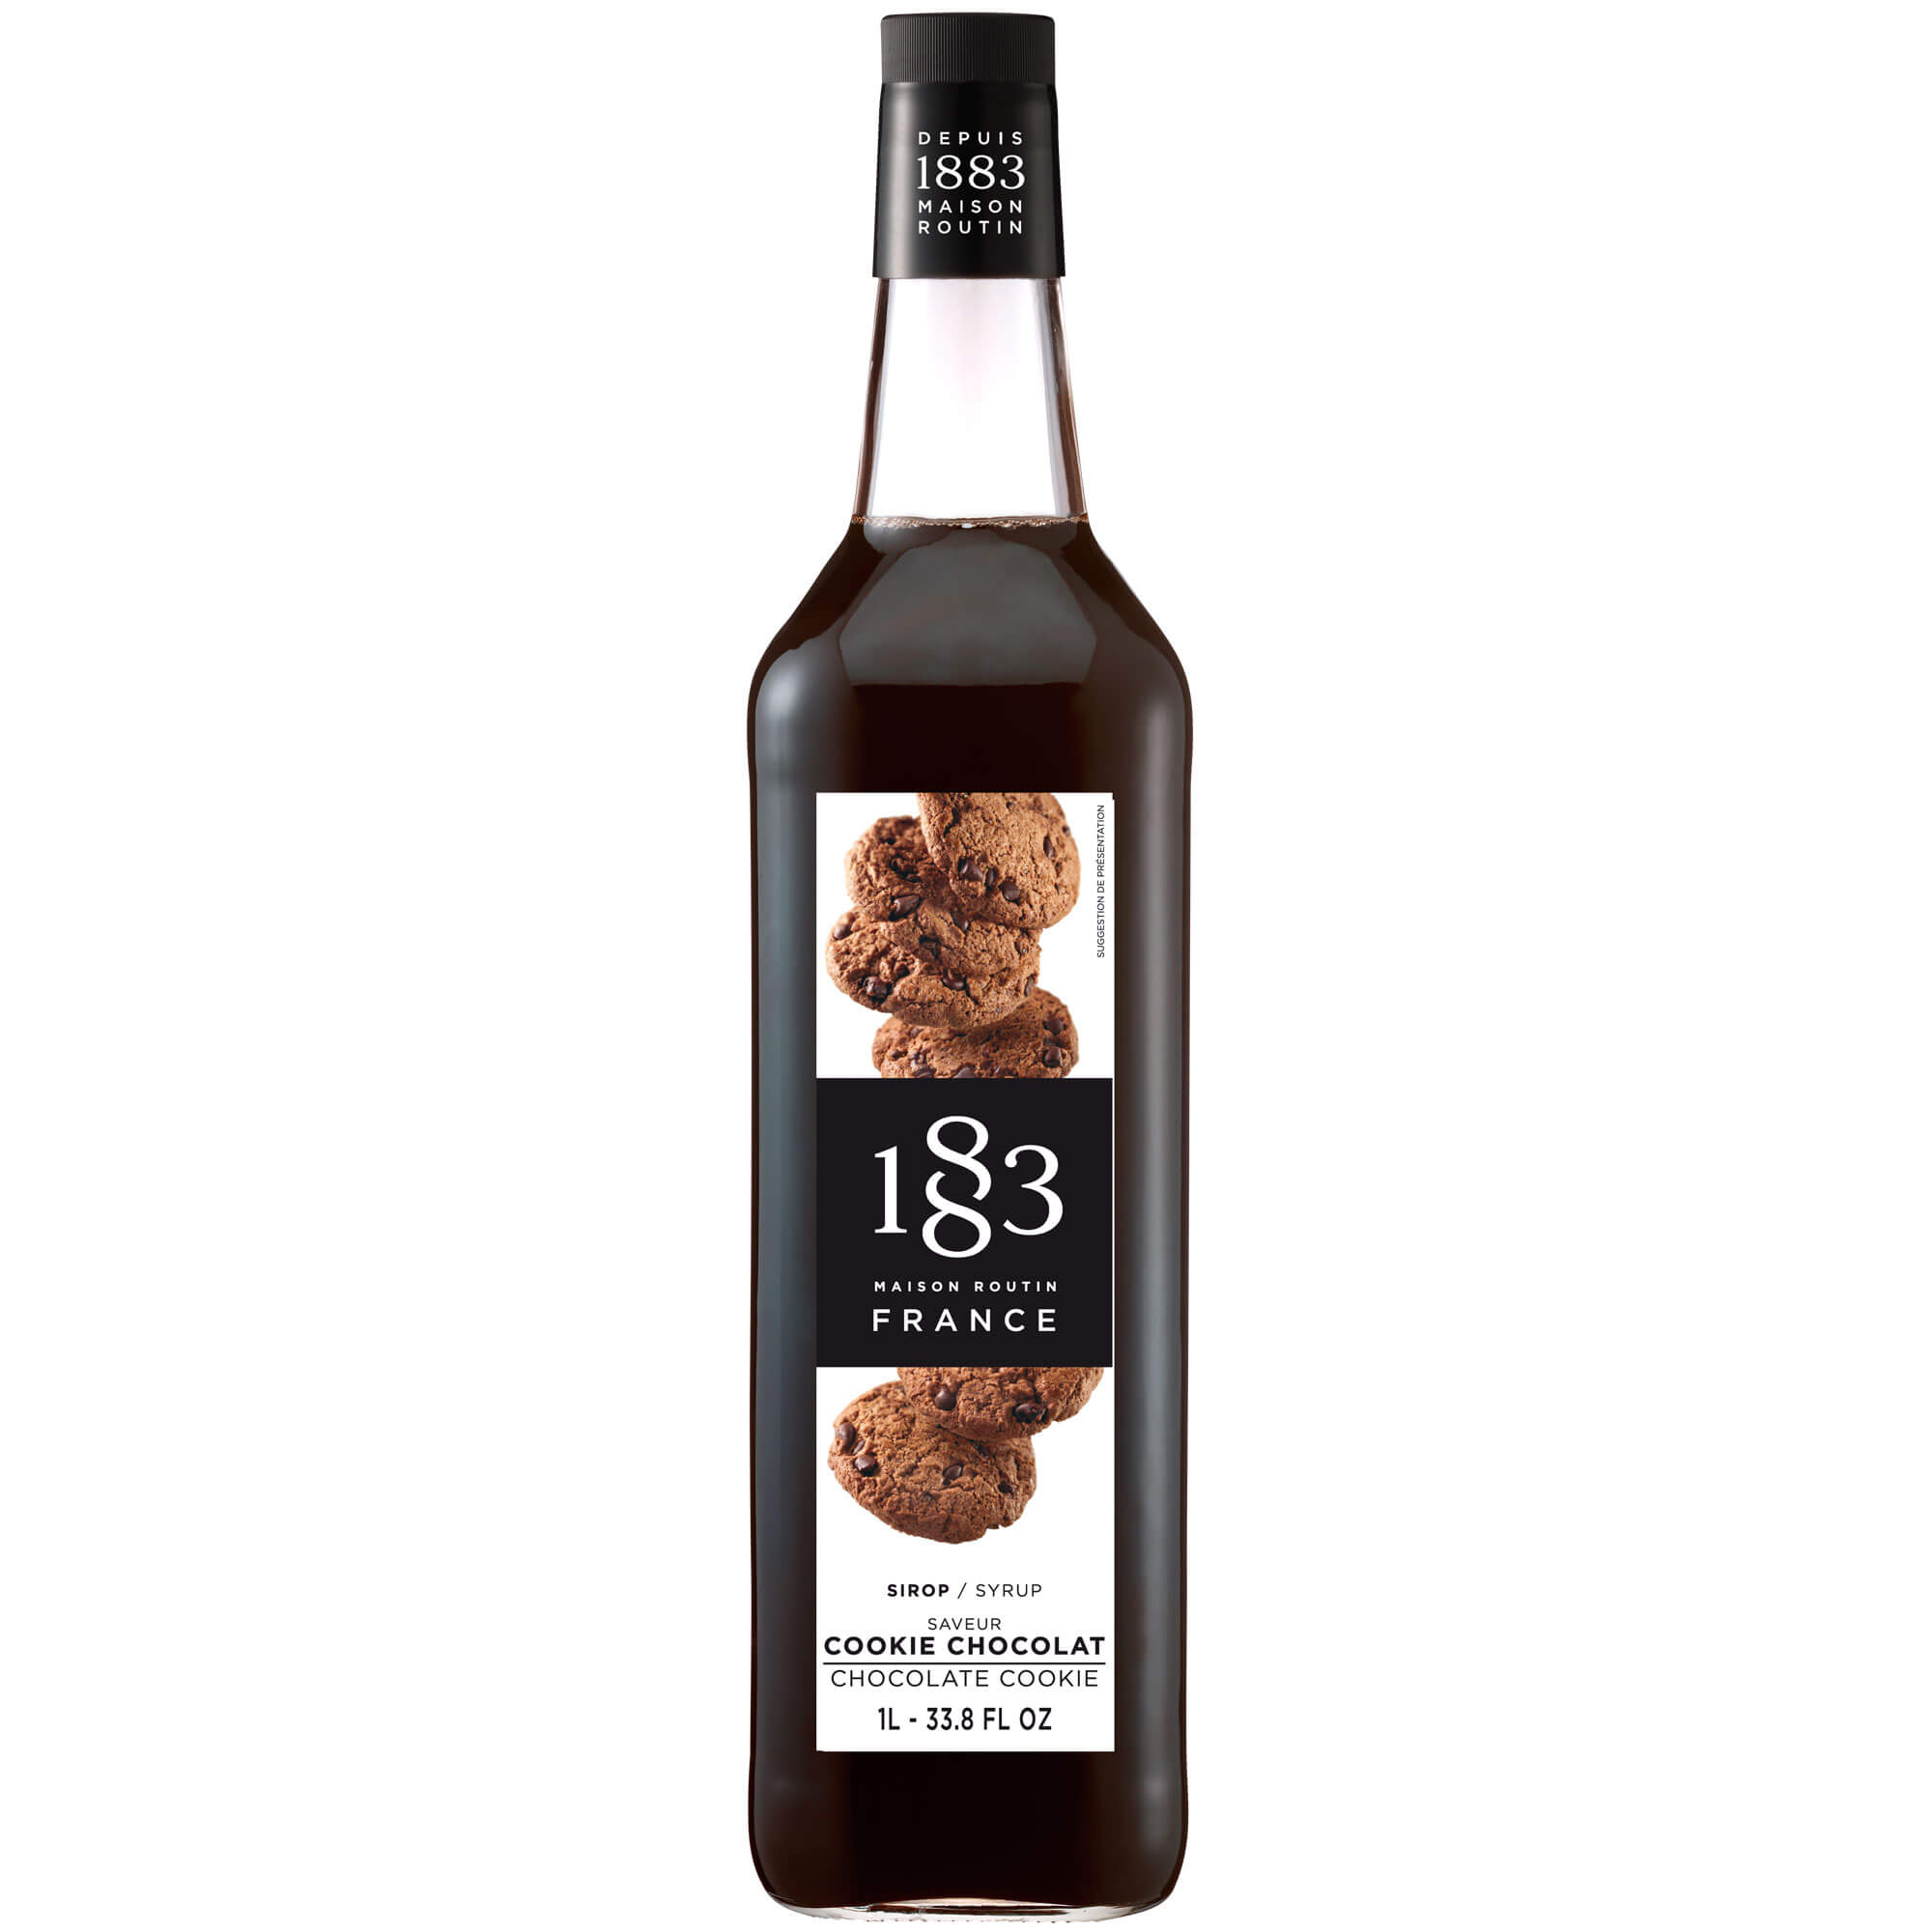 Chocolate Cookie - Maison Routin 1883 Sirup (1,0l)